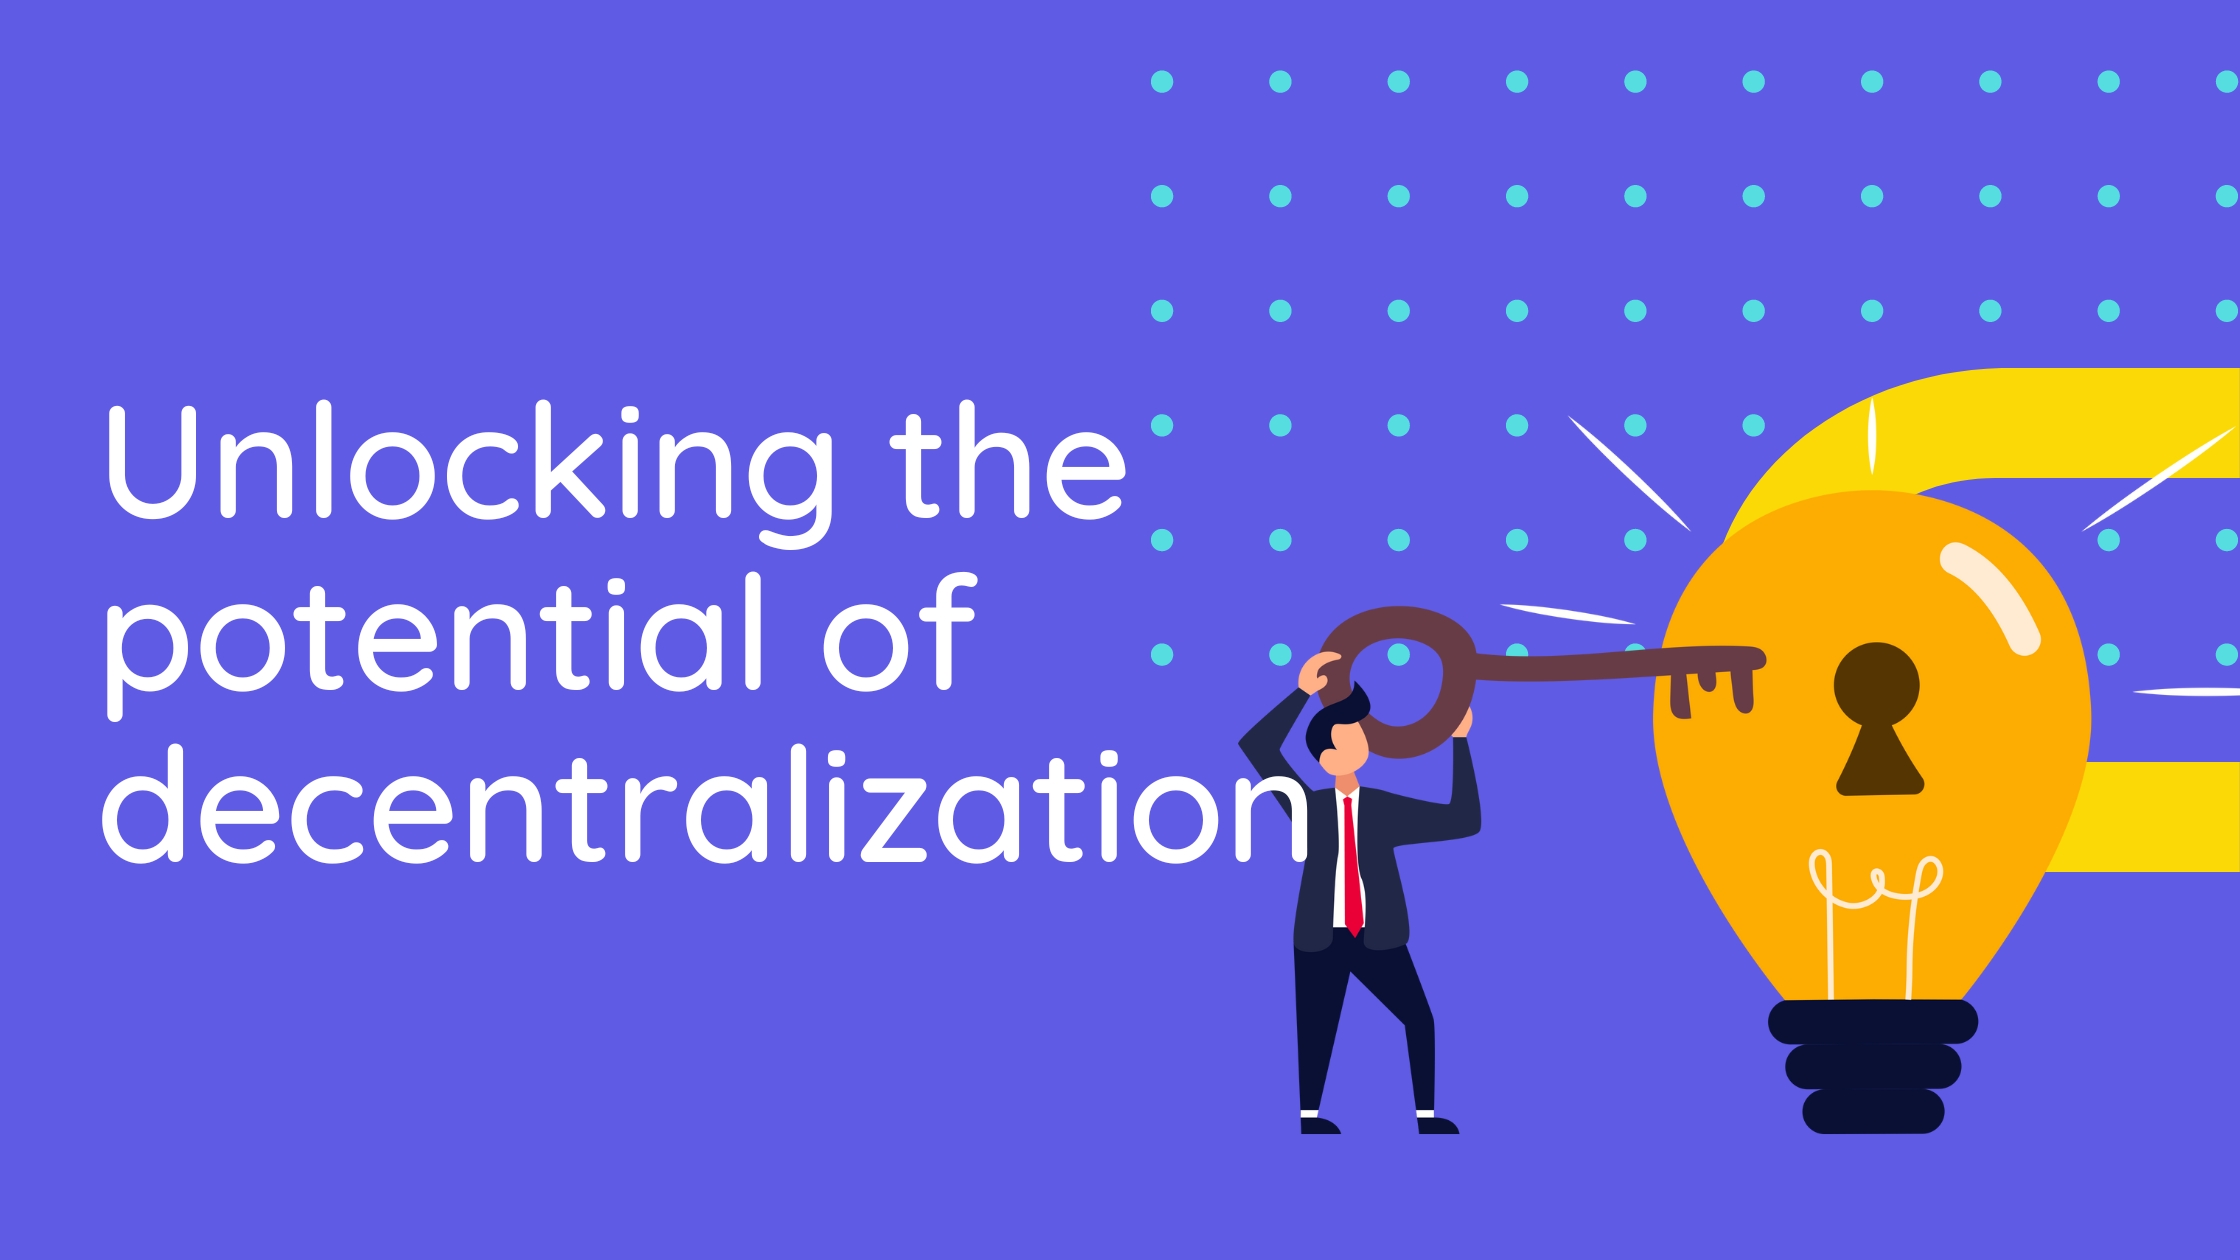 Unlocking the potential benefits of decentralization